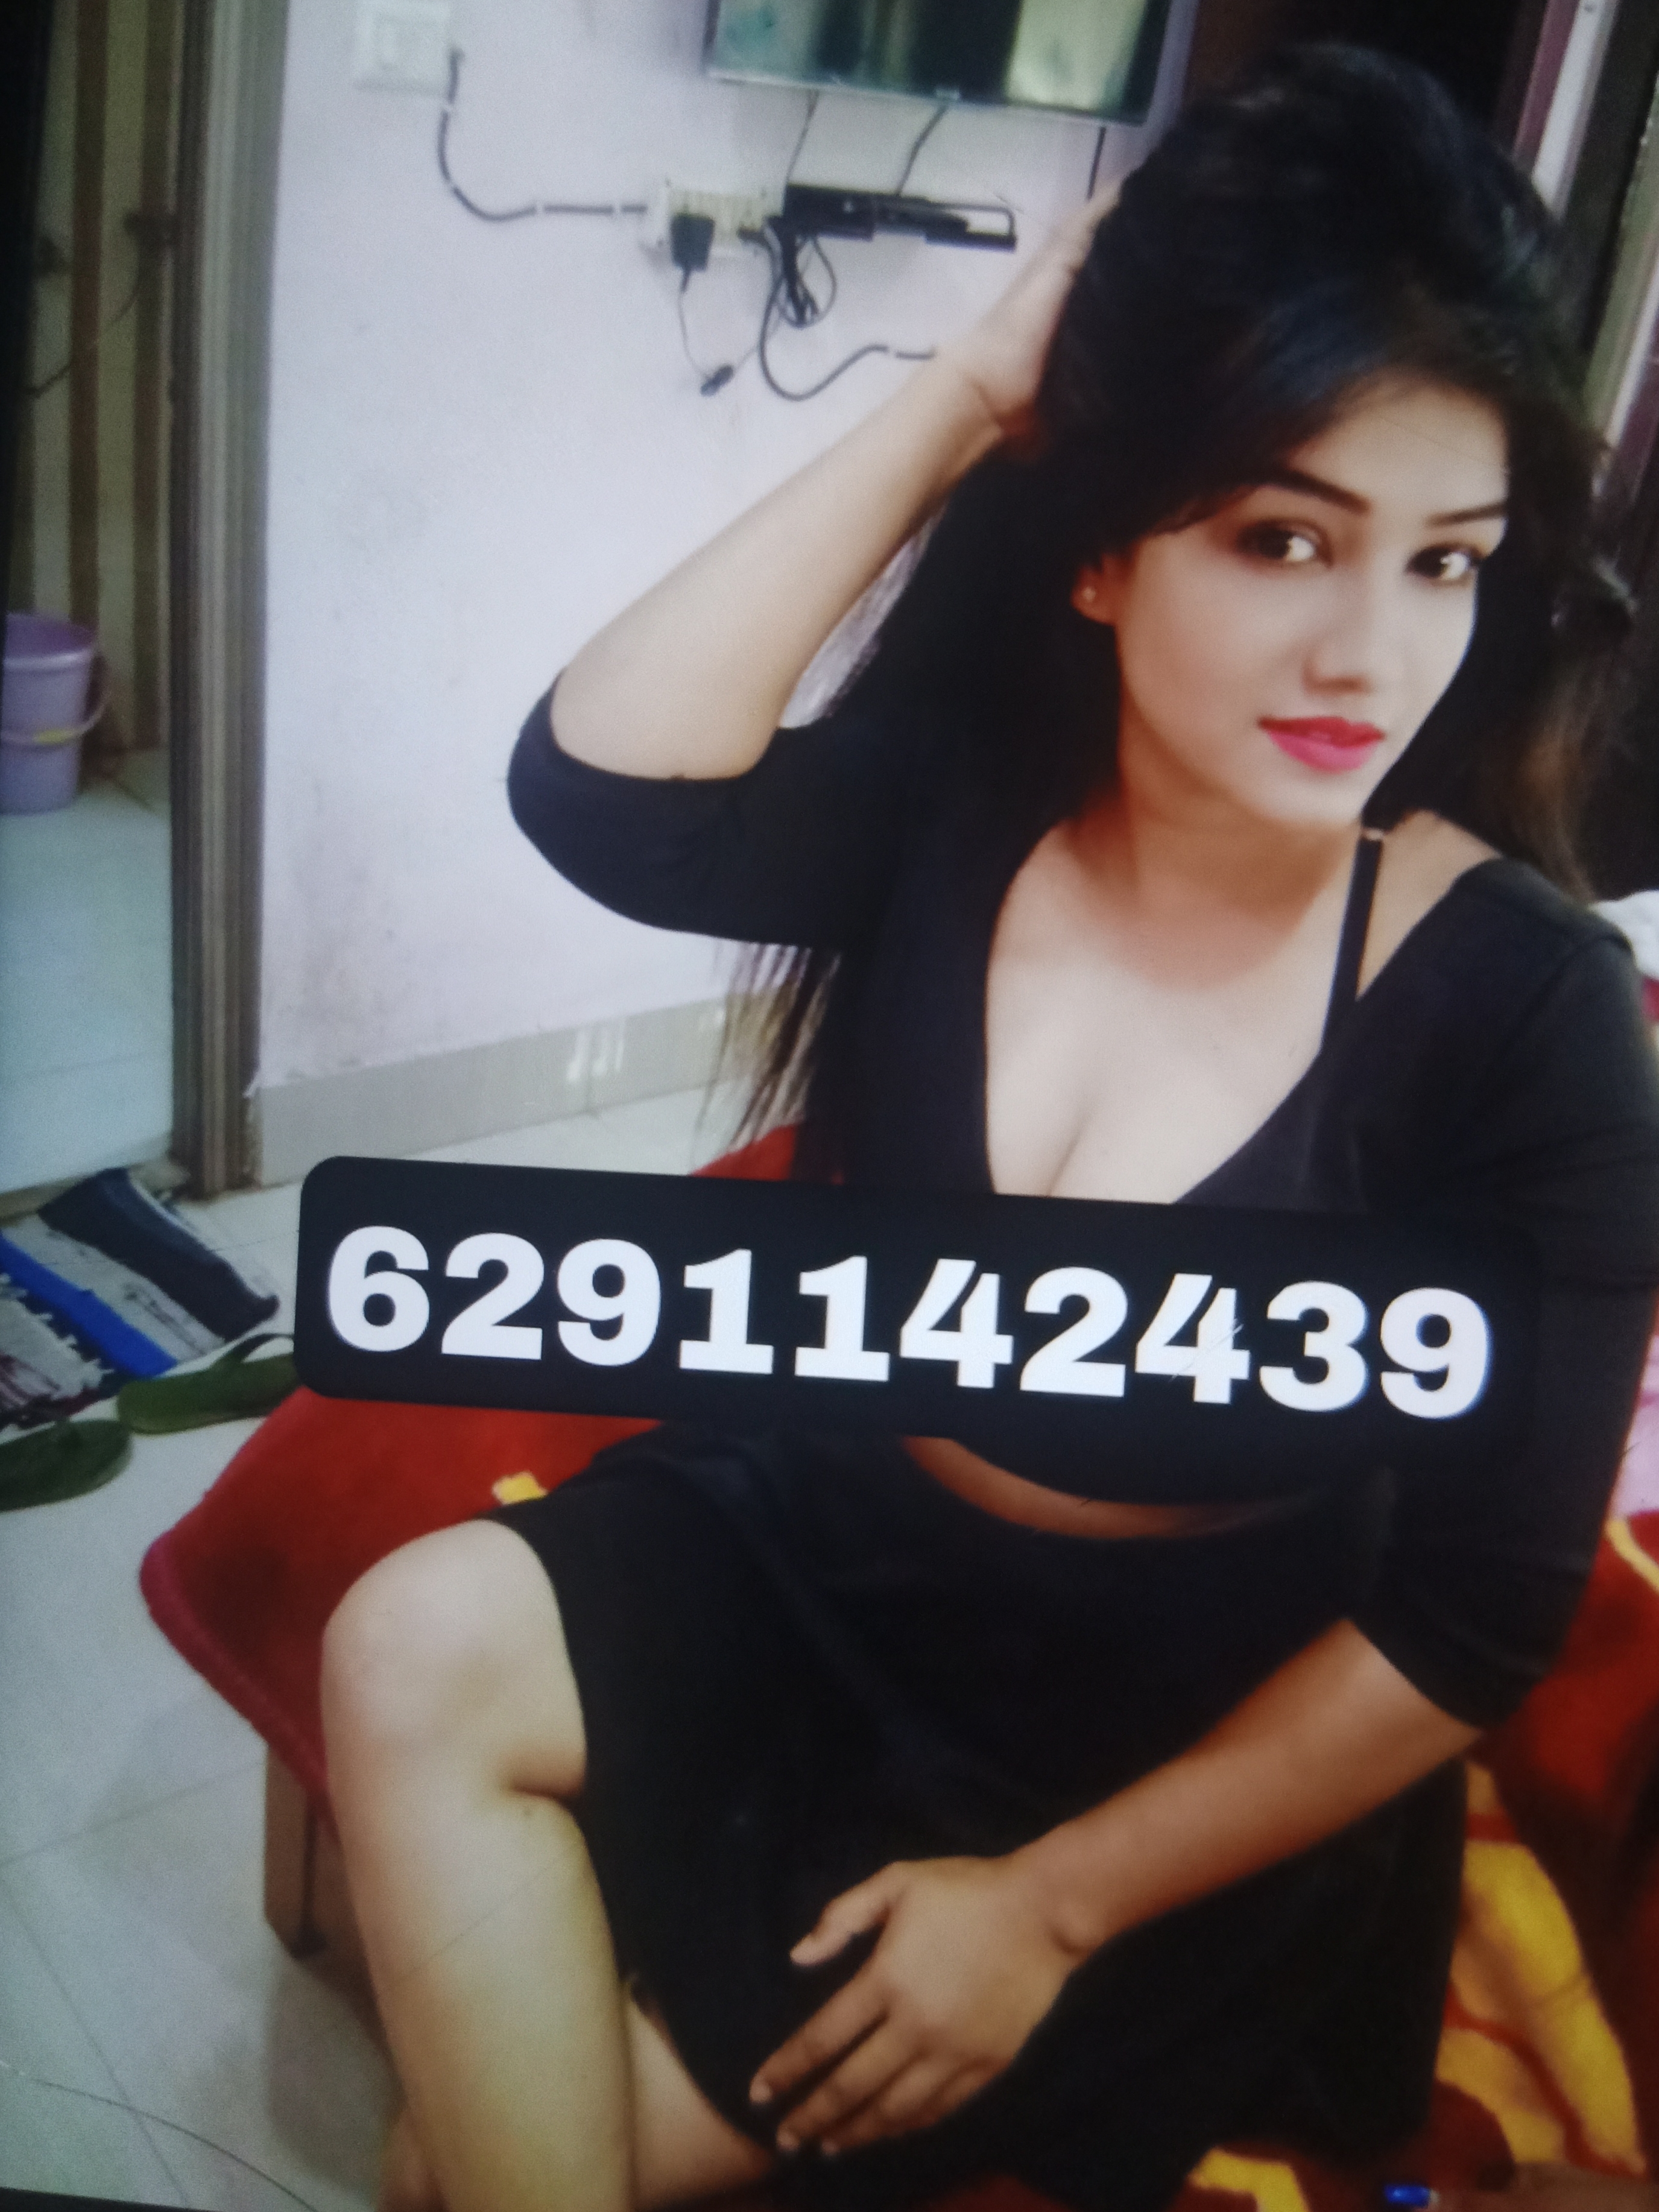 High college girl provider best regards low price safe and secure 